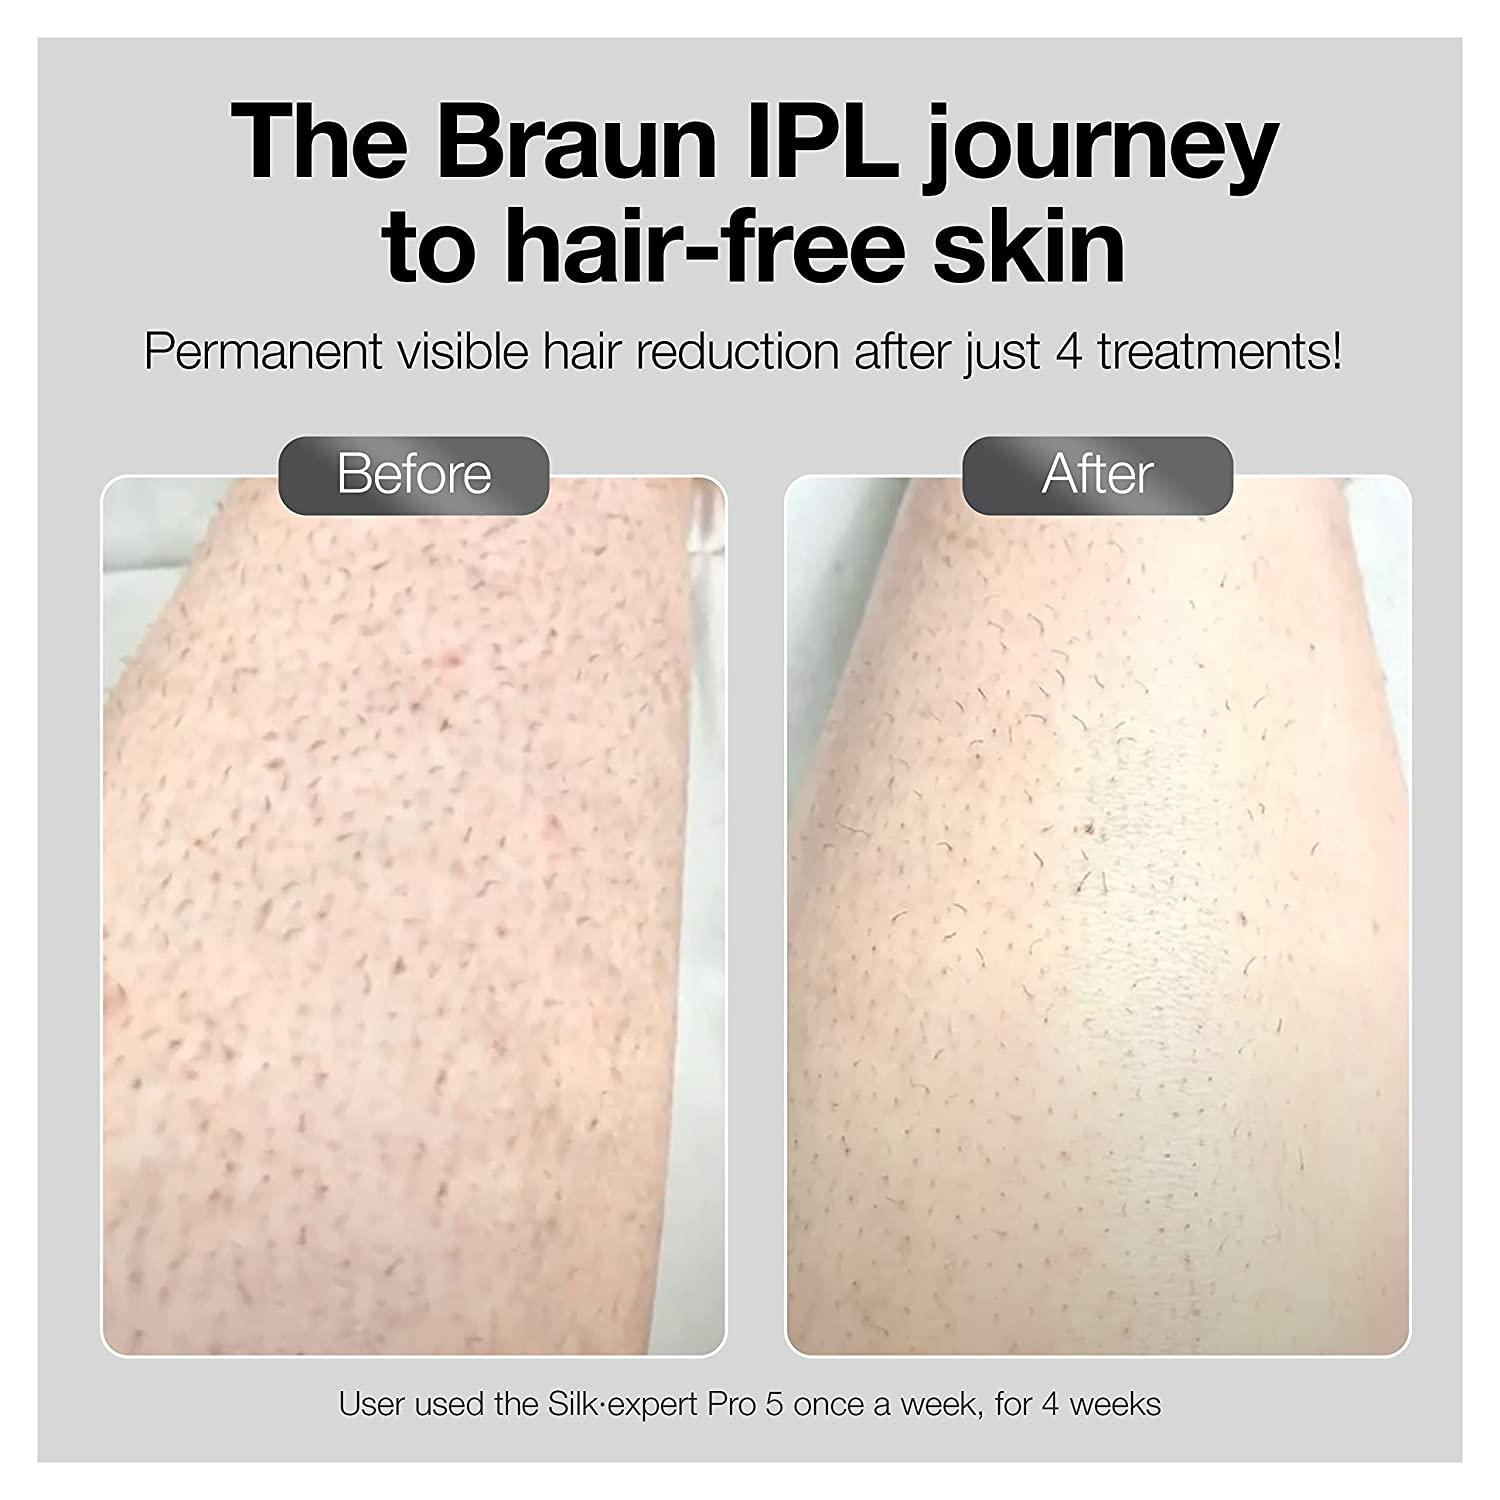 Braun IPL Permanent Hair Removal System for Women and Men, NEW Silk Expert  Pro 3 PL3221, Head-to-toe Usage, FDA Cleared, for Body & Face, Alternative  to Salon Laser Hair Removal, With 3